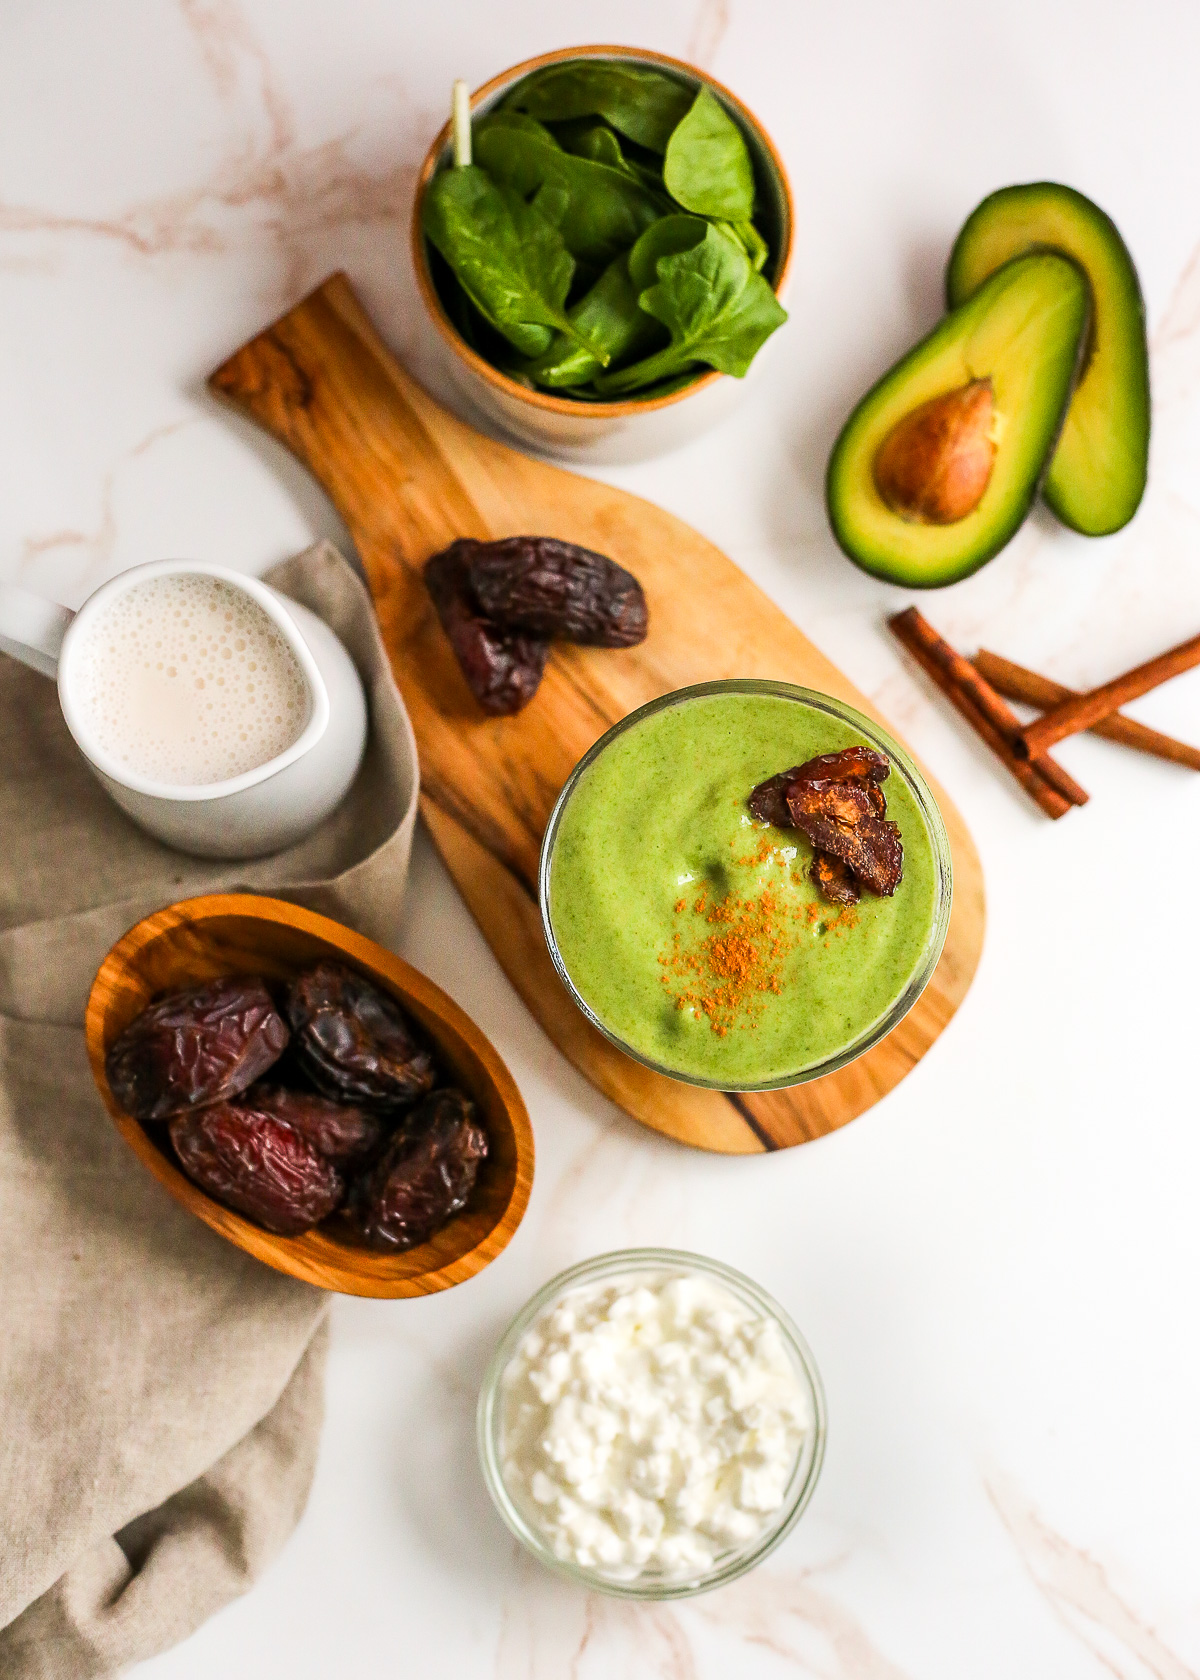 Overhead shot showing the ingredients needed to make a high protein green smoothie, including fresh dates, cottage cheese, milk, cinnamon sticks, avocado, and fresh spinach, with the blended smoothie centered in the middle of the frame, garnished with a few chopped dates and a dusting of cinnamon